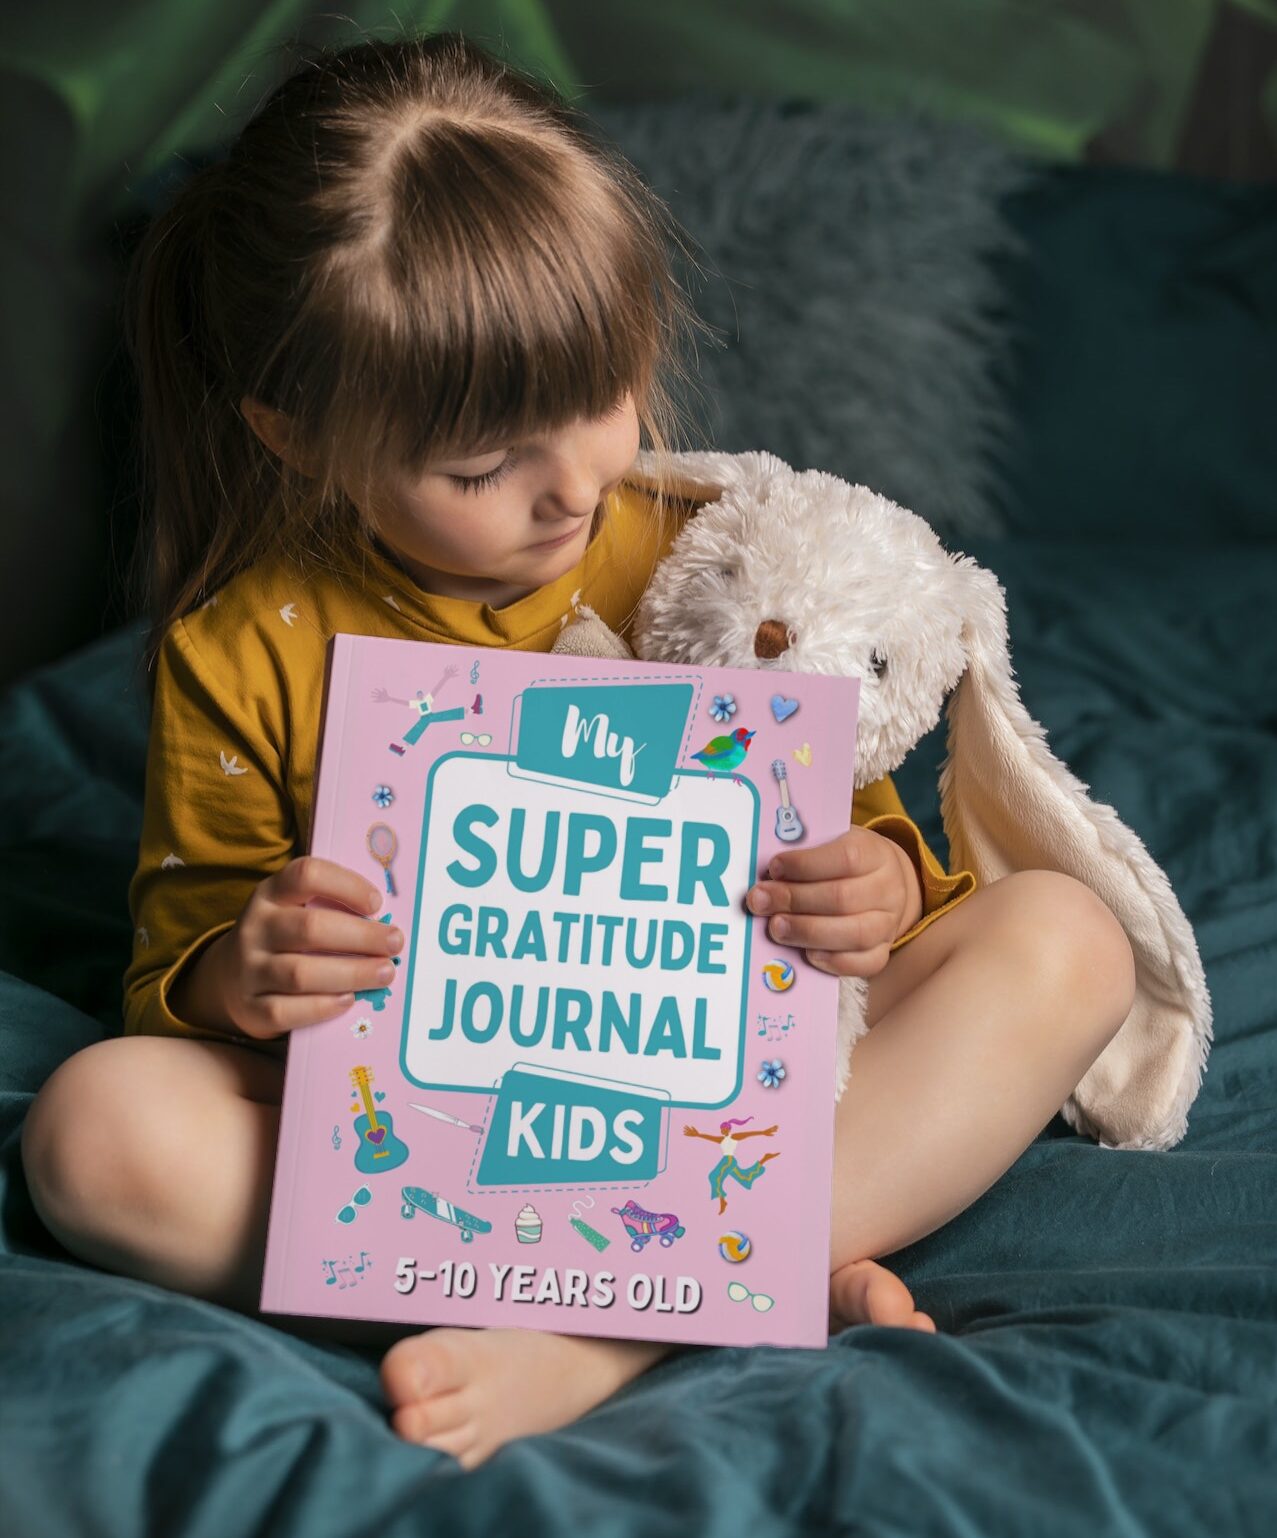 Our Free 1-Month Super Gratitude Journal for Kids